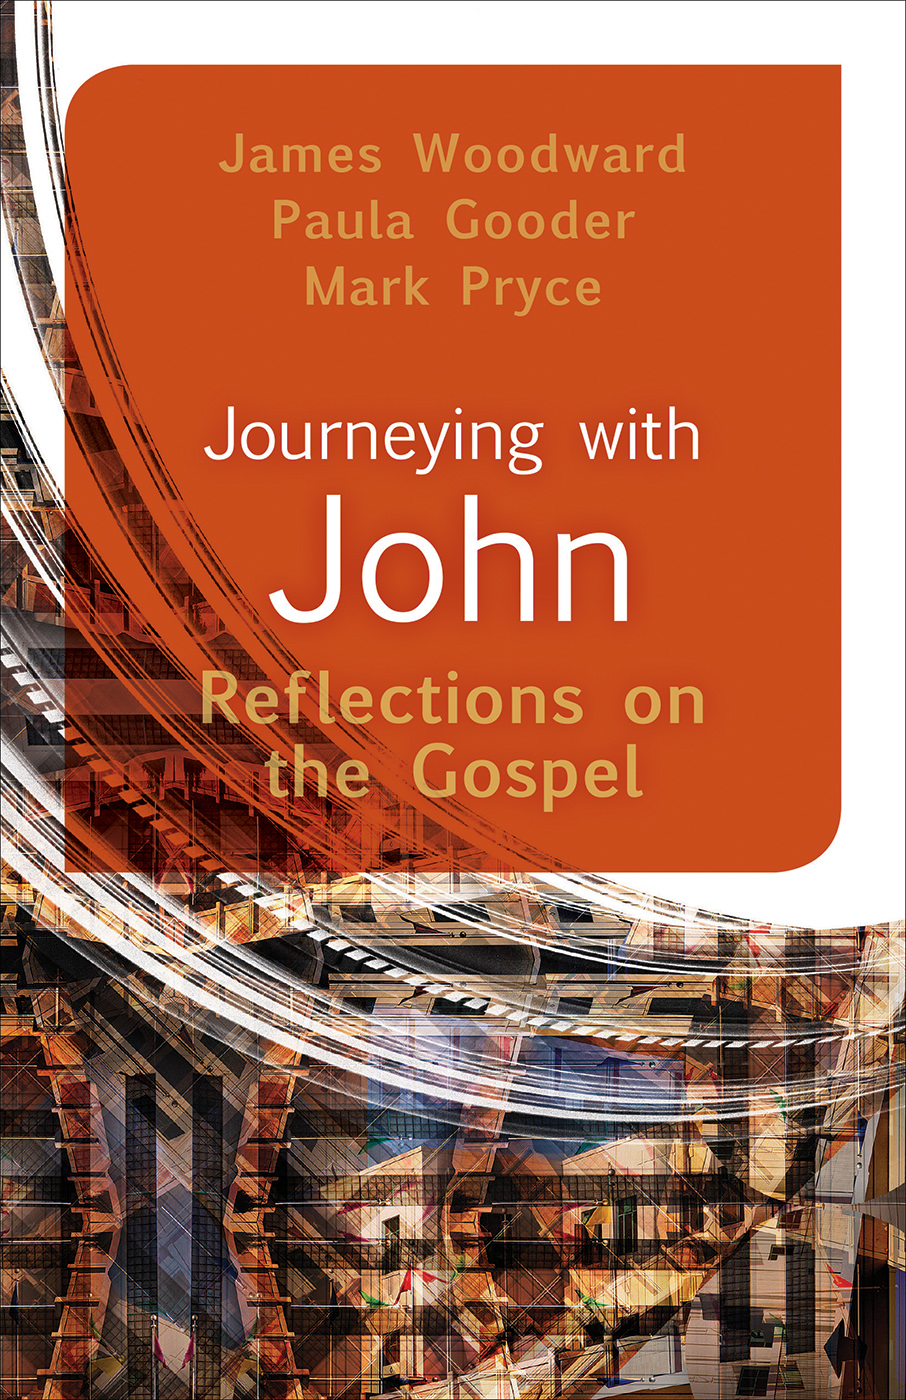 Journeying with John